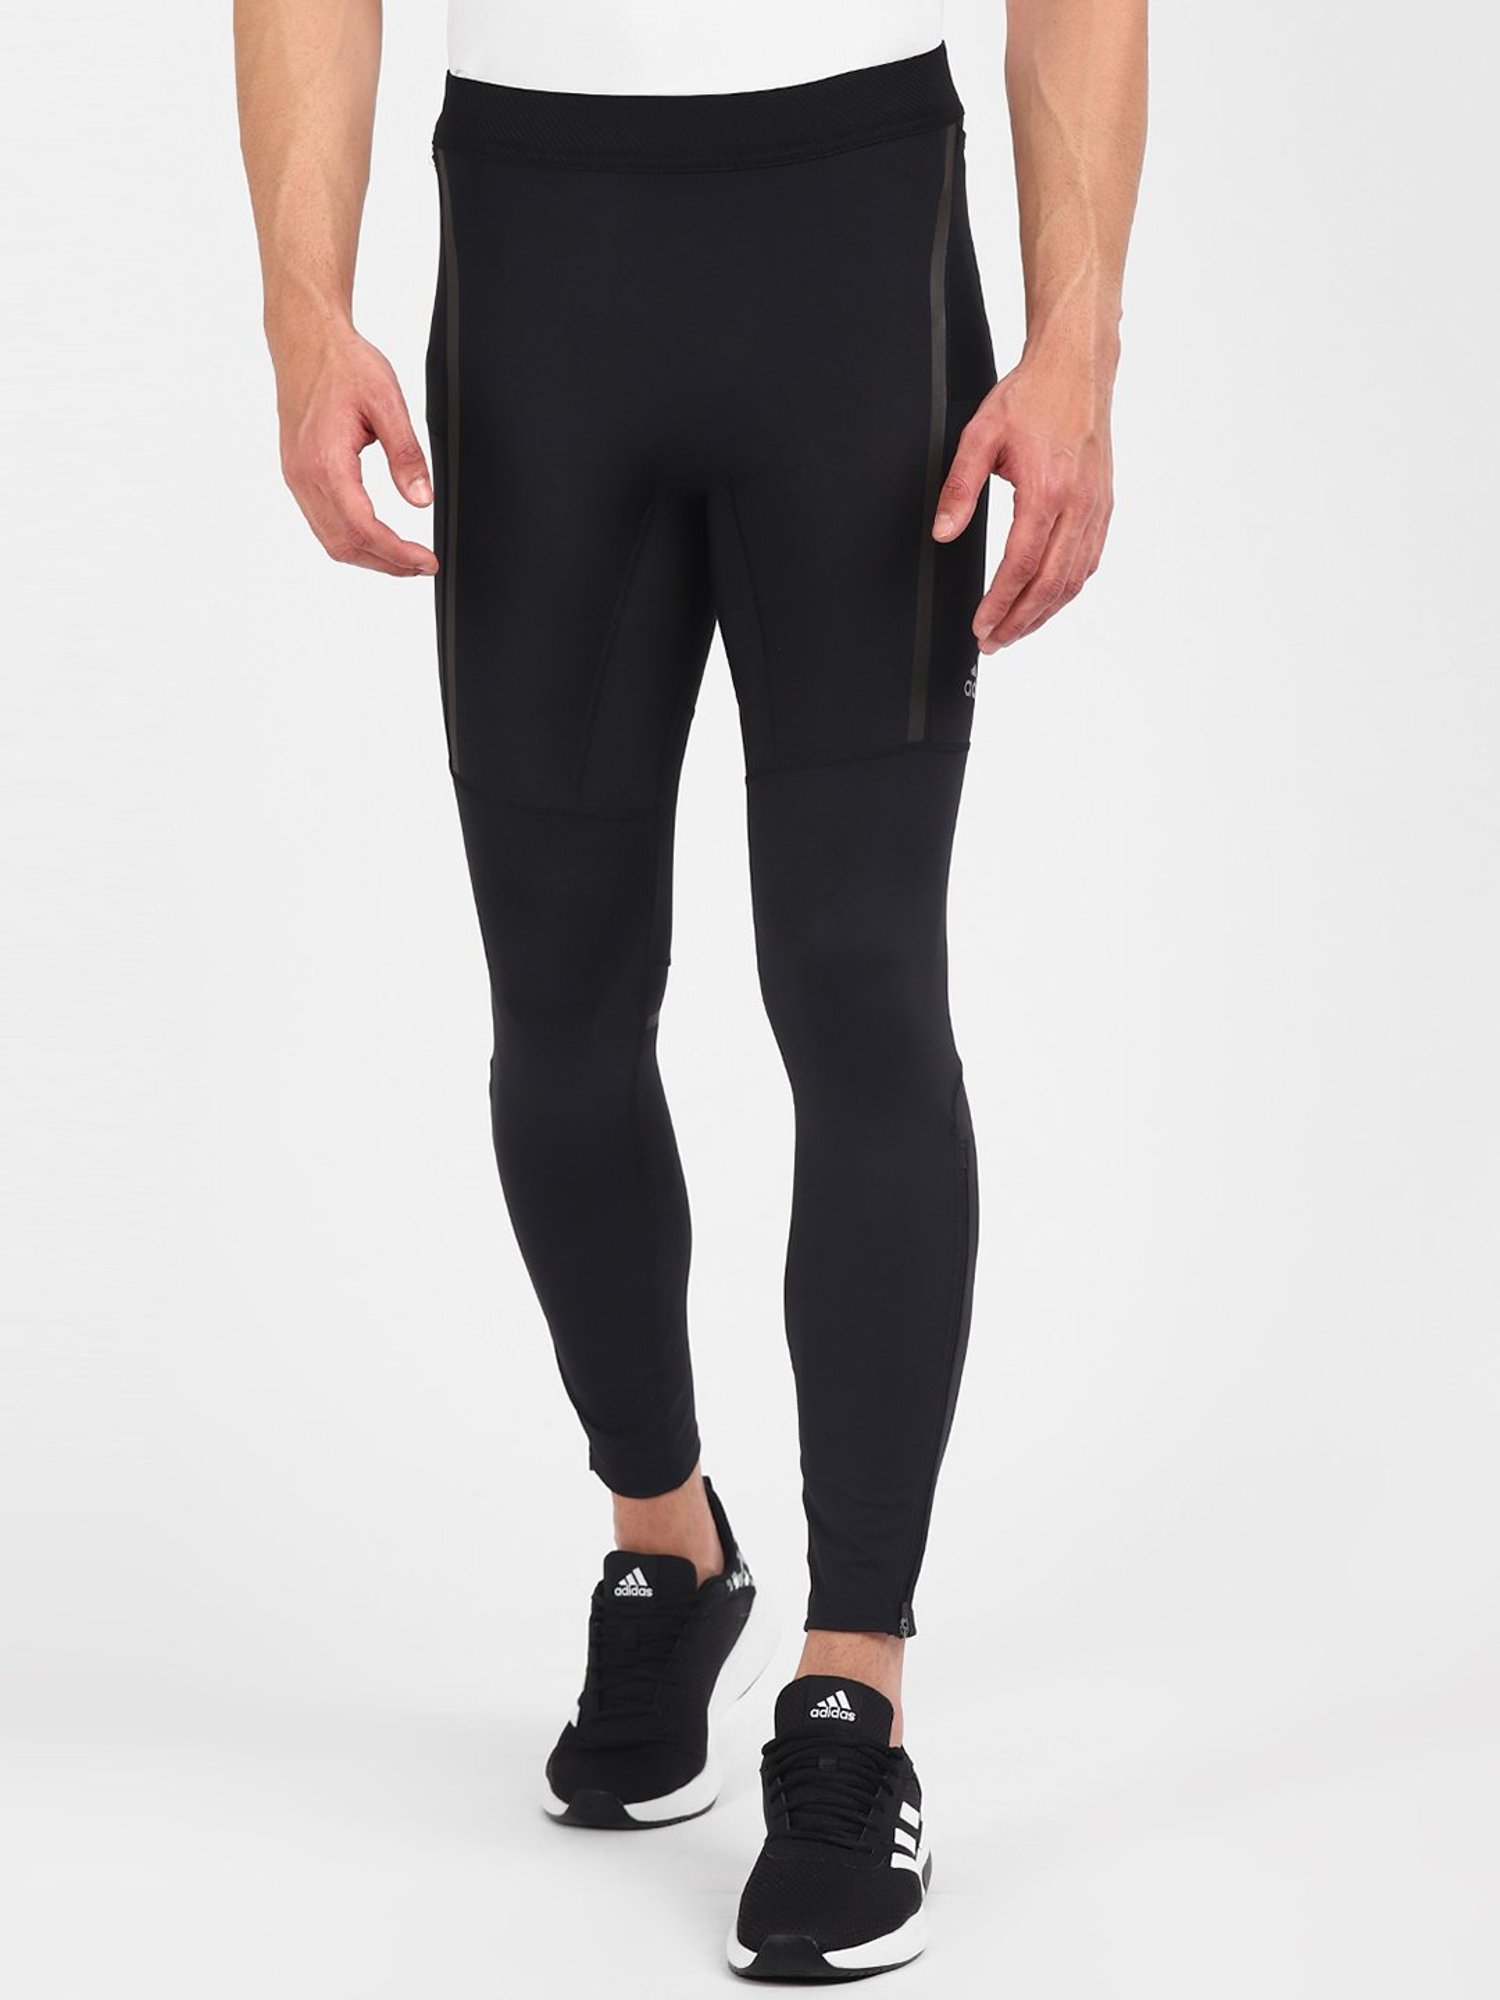 Buy adidas Black Fitted Tights for Men's Online @ Tata CLiQ